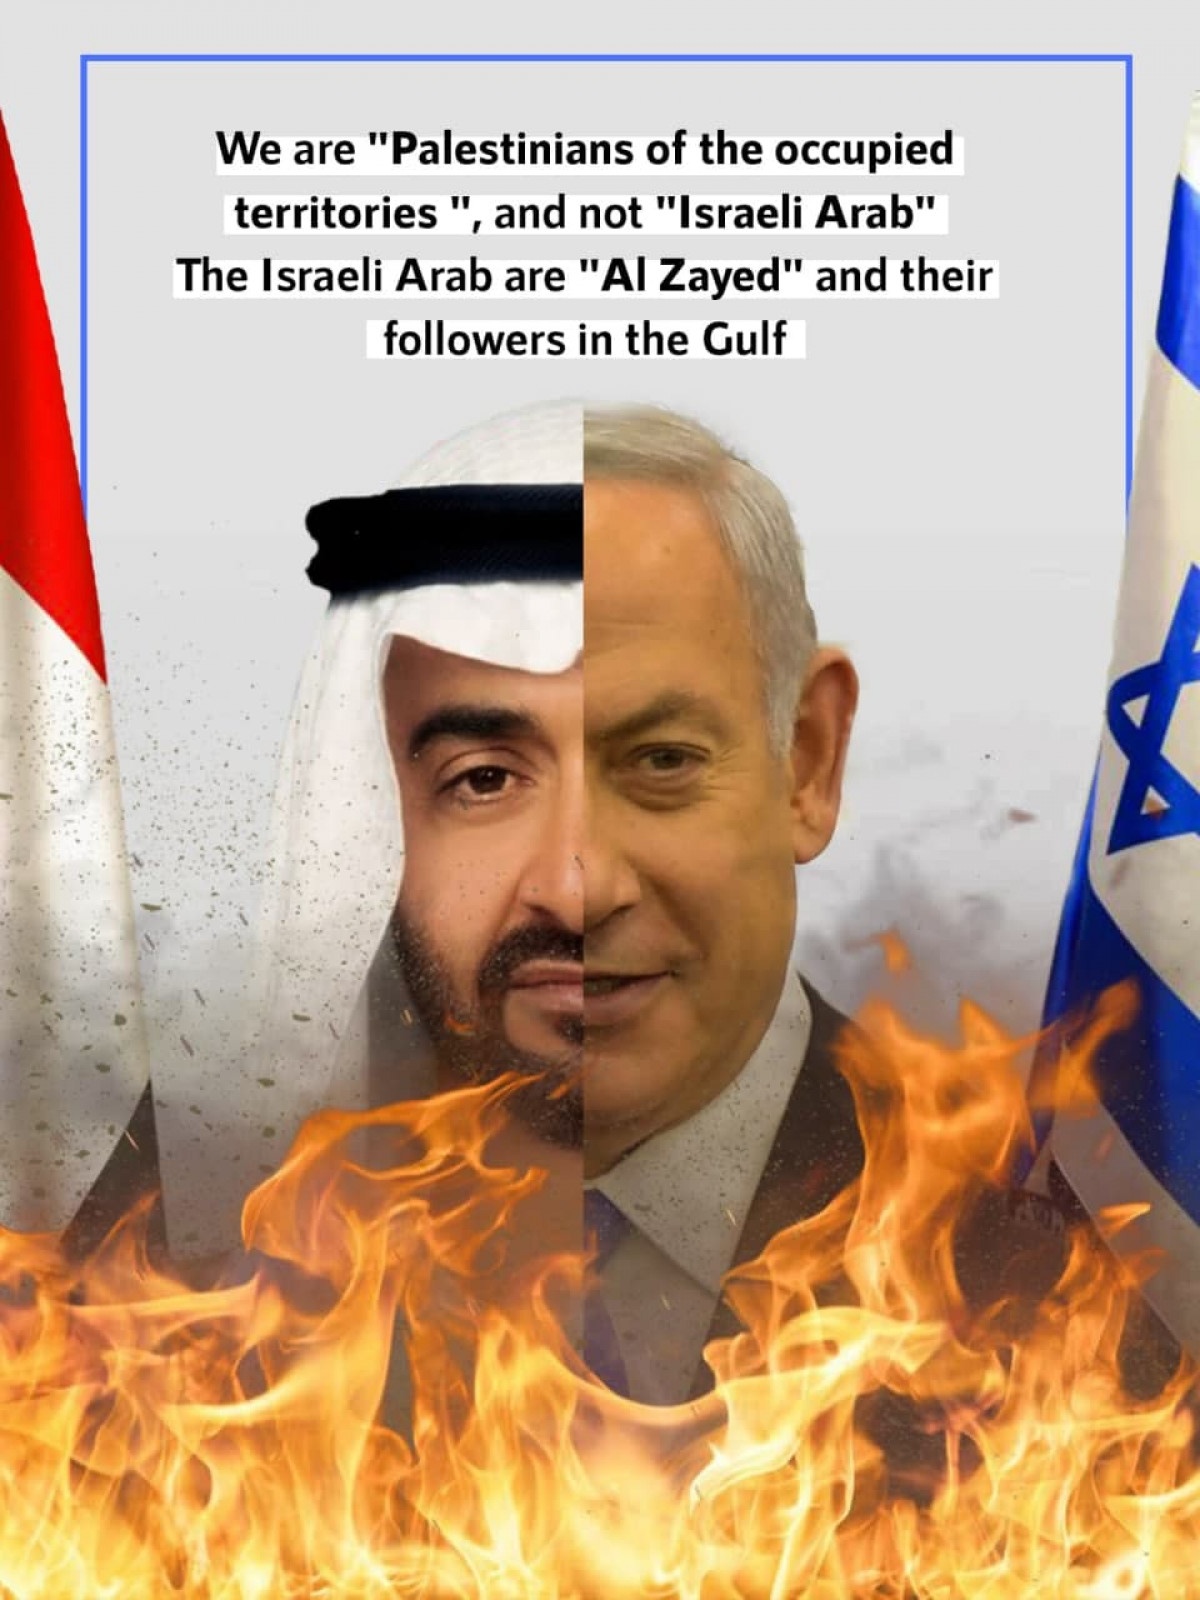 We are "Palestinians of the occupied territories ", and not "Israeli Arab" The Israeli Arab are "Al Zayed" and their followers in the Gulf